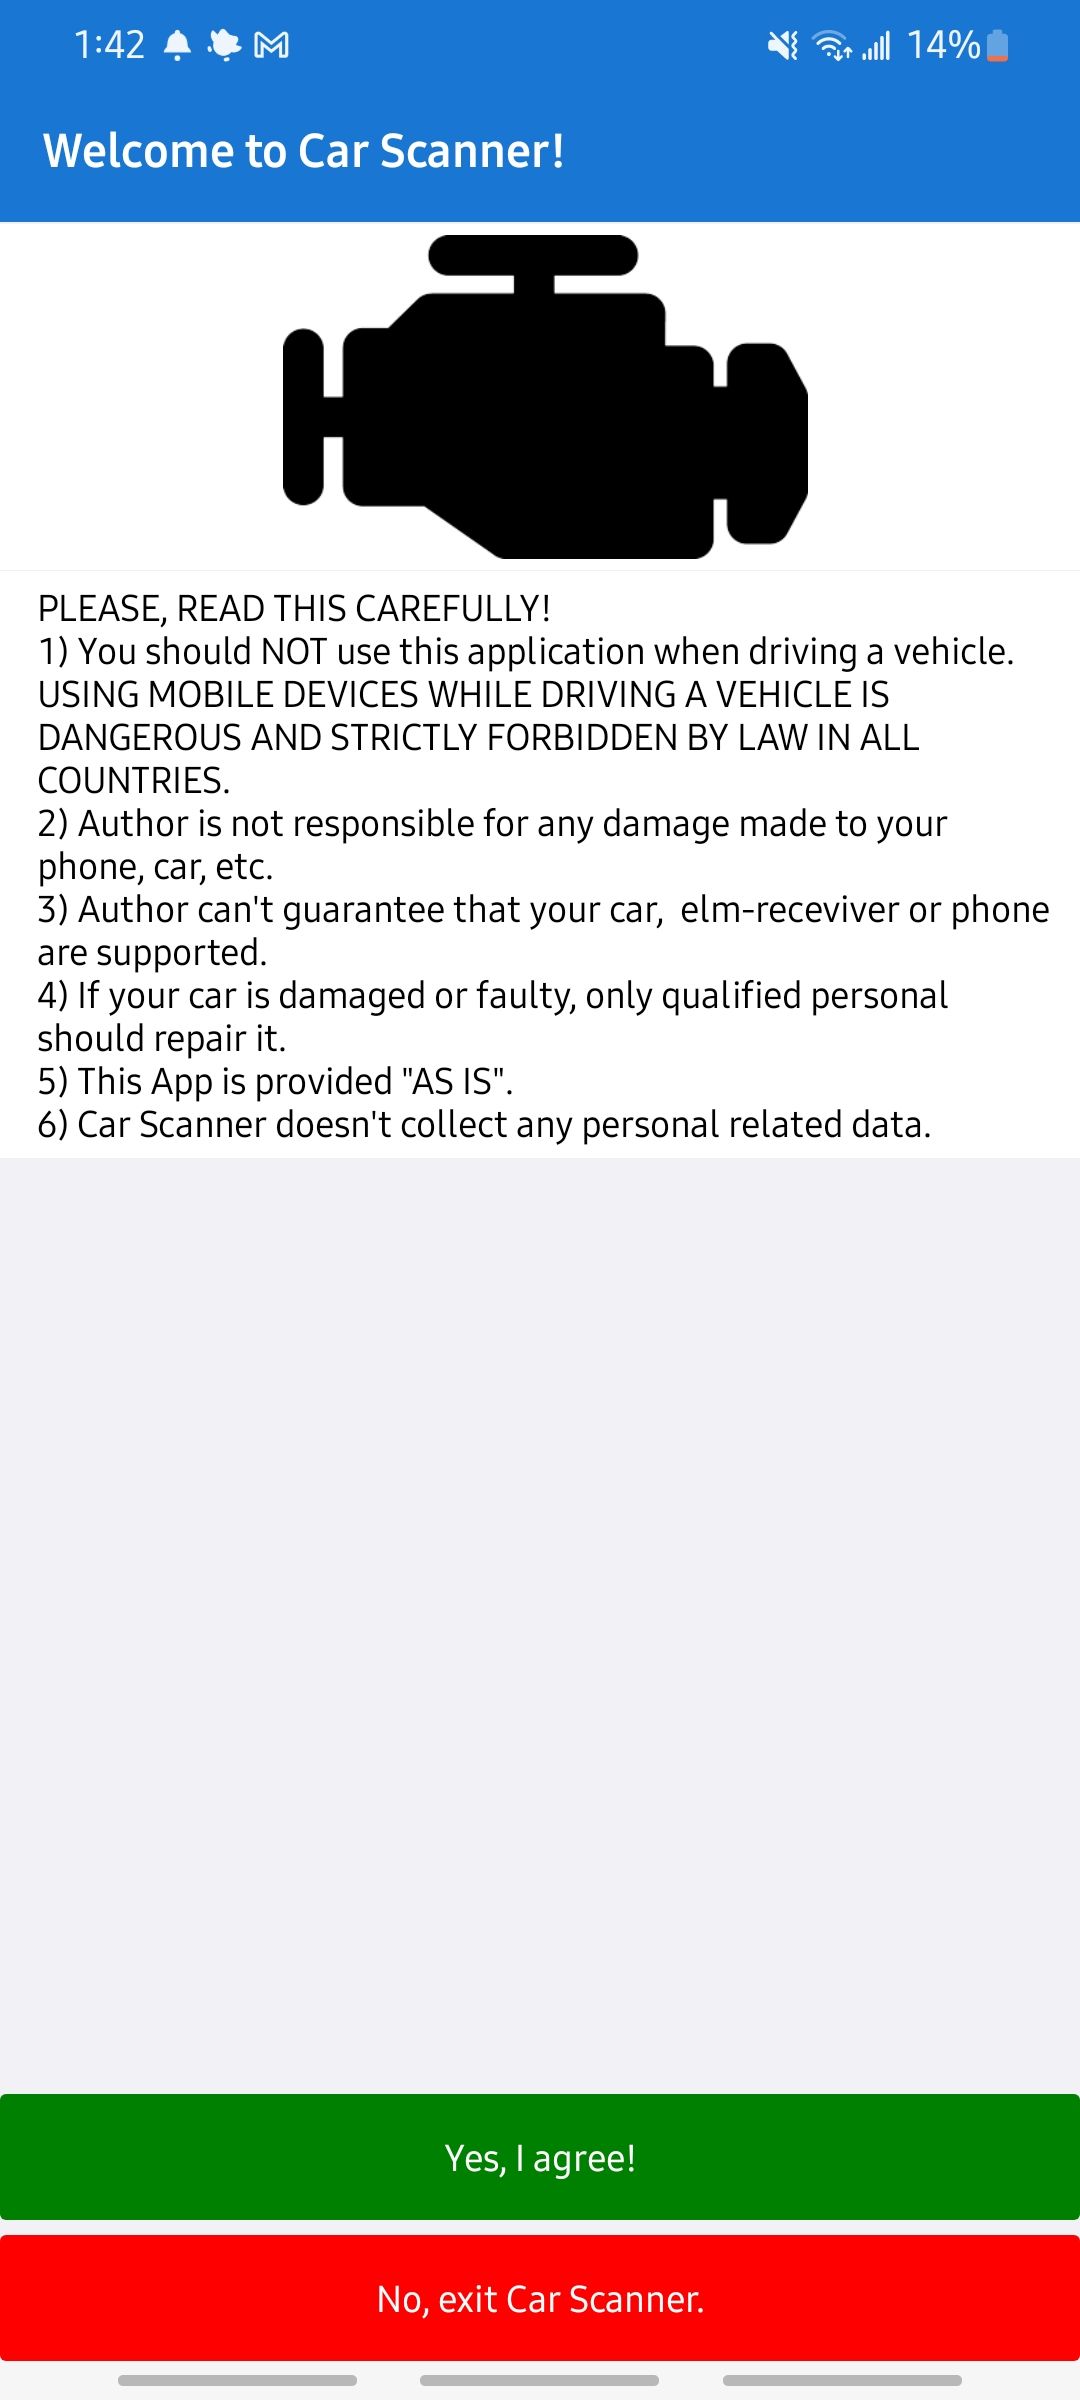 car scanner app intro screen with warnings and preventative info